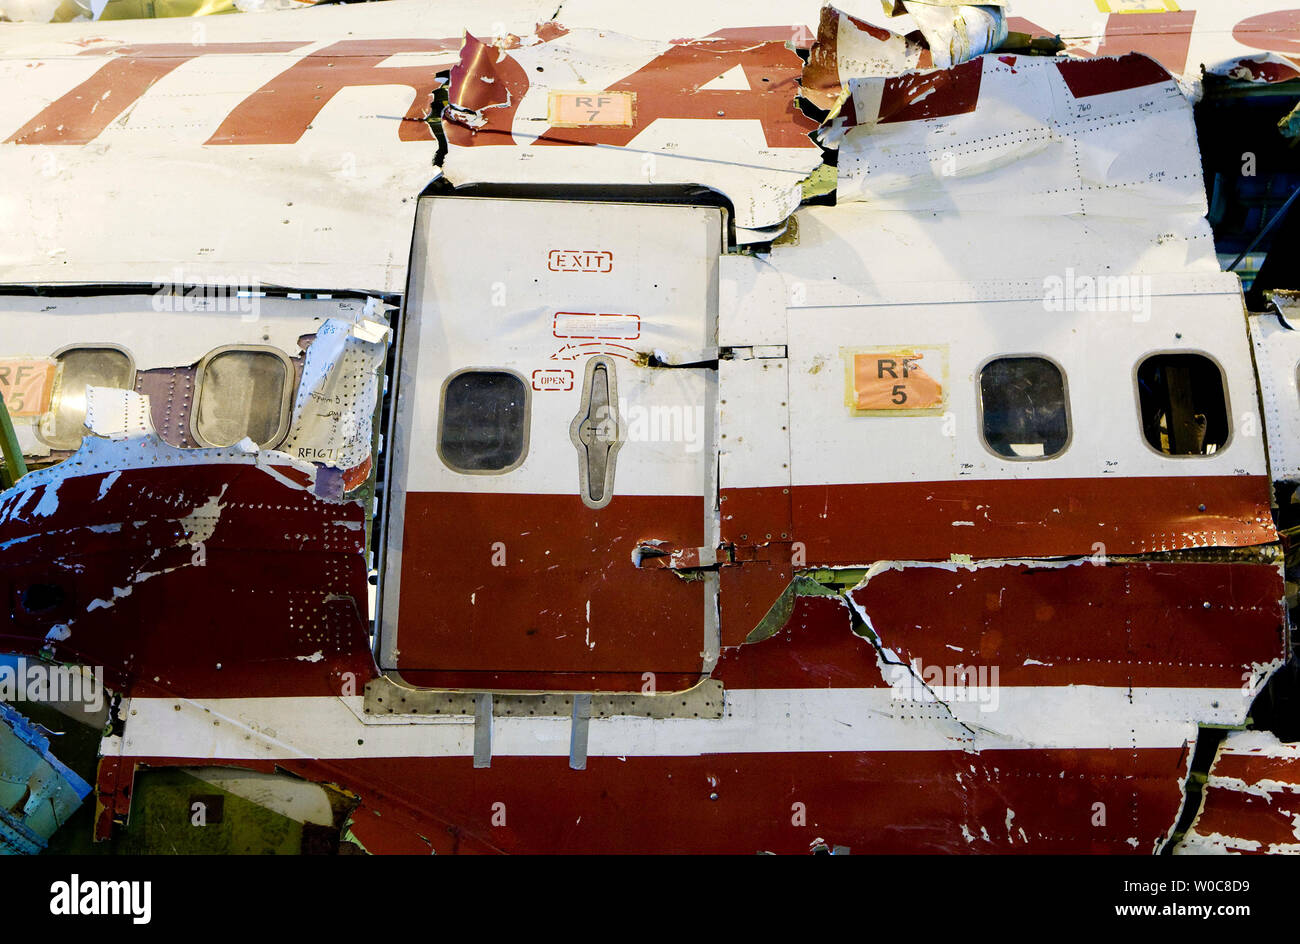 The recovered wreckage of TWA Flight 800 stands reassembled at the National Transportation Safety Board Training Academy where it is used for training new investigators in Ashburn, Virginia on July 16, 2008. The Boeing 747 crashed into the Atlantic after passing over Long Island Sound and Long Island, New York in 1996, after a flammable mixture of fuel and oxygenated air caused a catastrophic explosion. The Department of Transportation announced that almost all U.S. commercial airliners will be required to install a new air separator to help prevent oxygen from entering an aircrafts' fuel tank Stock Photo